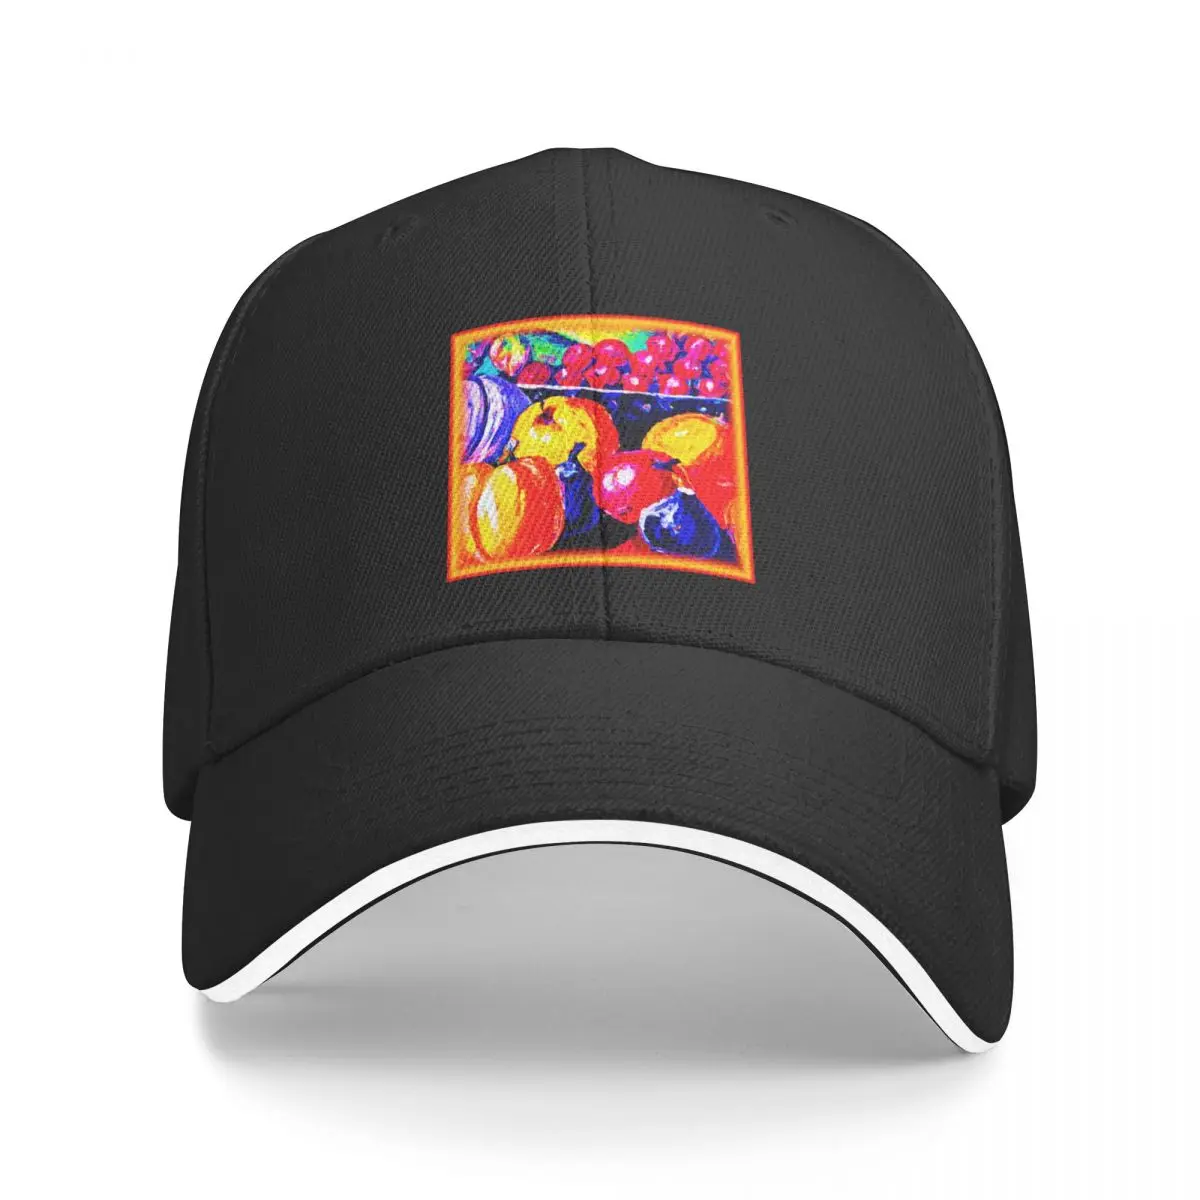 

Baseball Cap For Men Women TOOL Band Stunning Fruity Oil Painting. Buy Now Dropshipping Snap Back Hat Fashionable Beach Hat